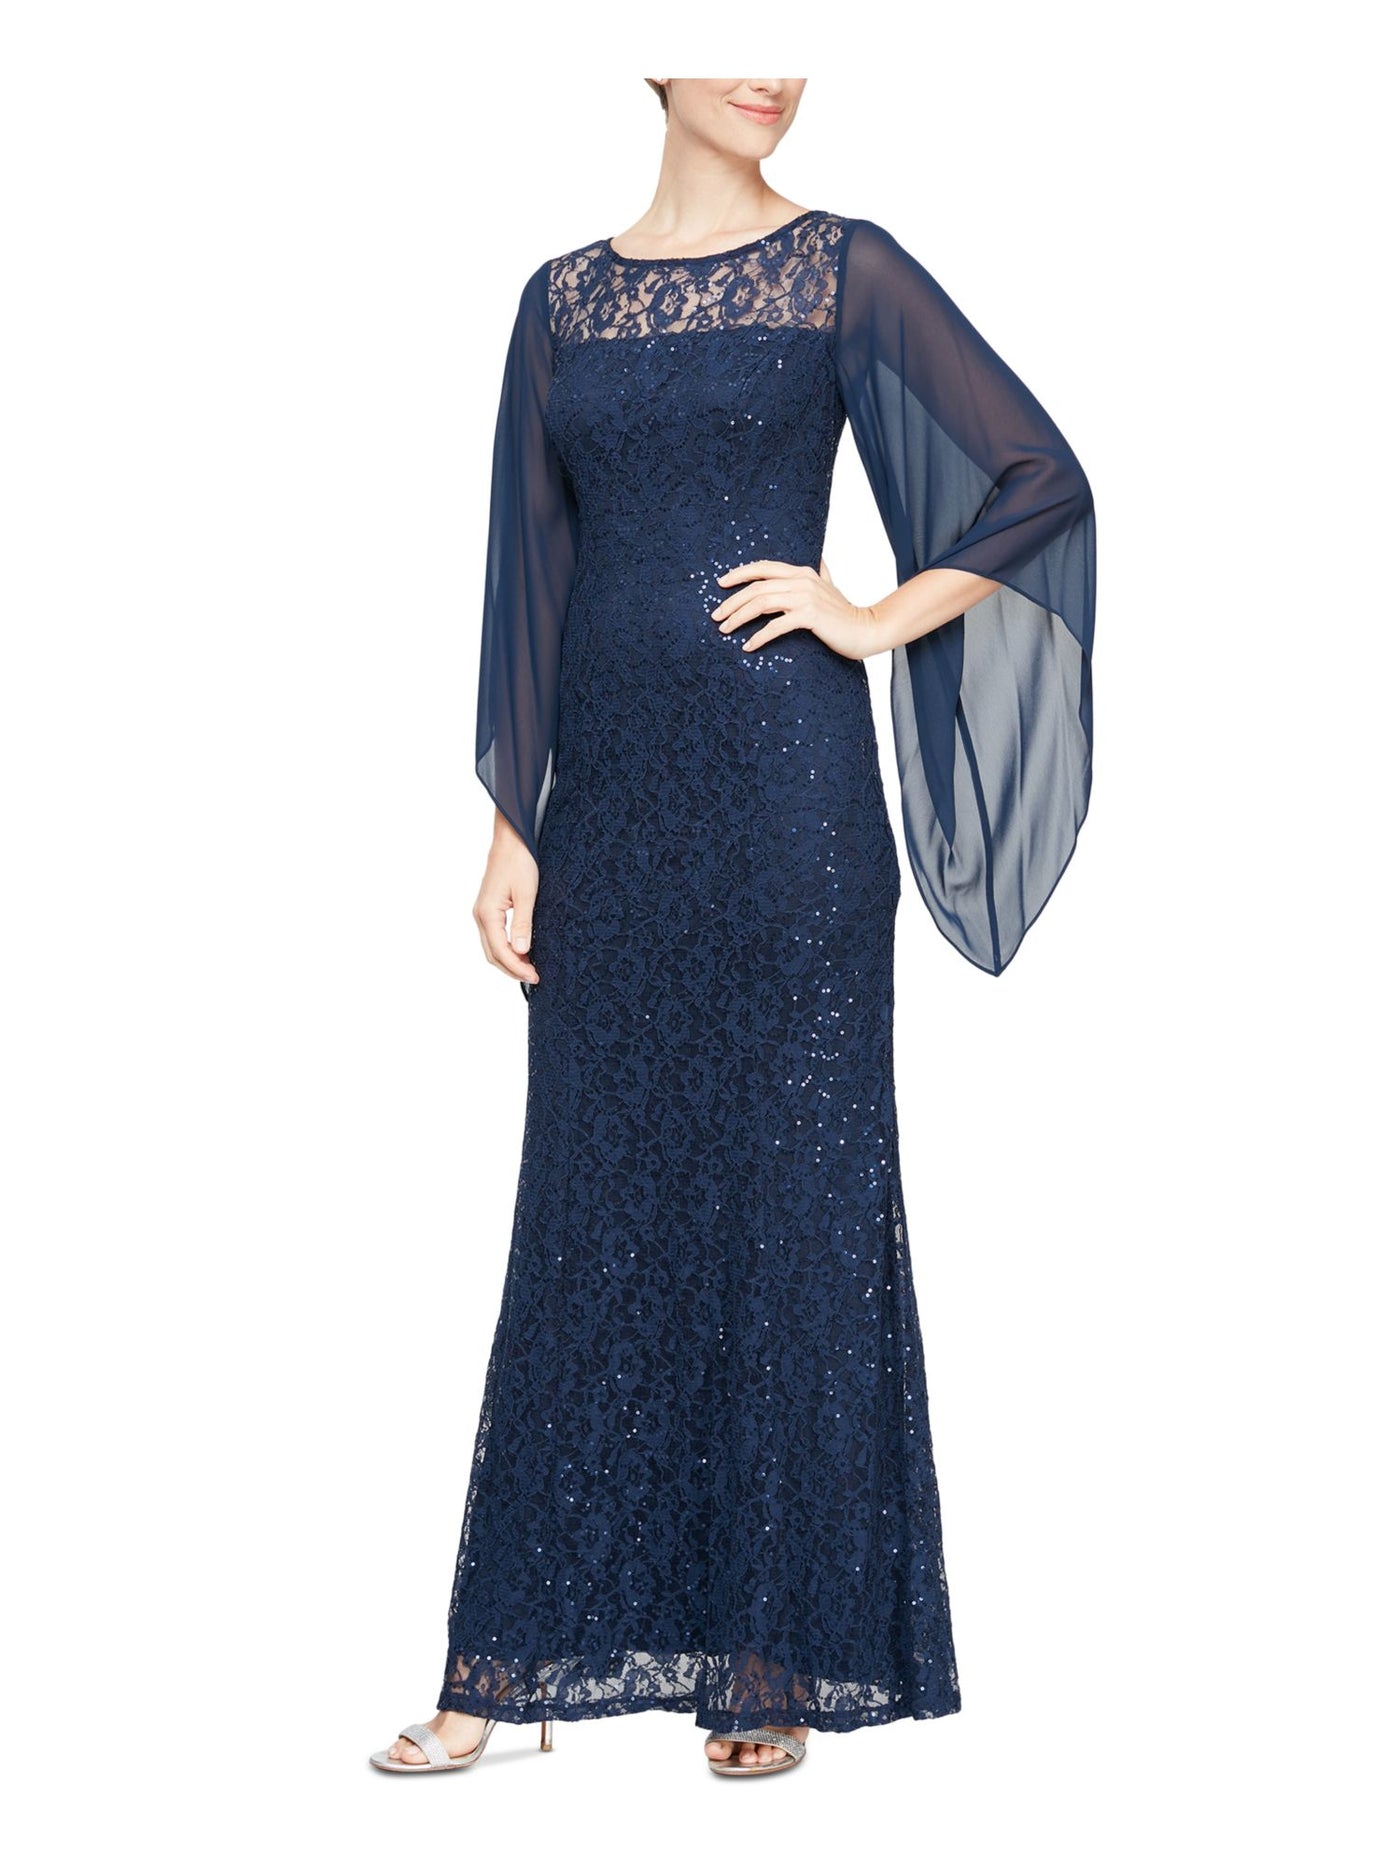 SLNY Womens Navy Sequined Zippered Keyhole Back Lined Sheer Long Sleeve Illusion Neckline Full-Length Evening Gown Dress 8